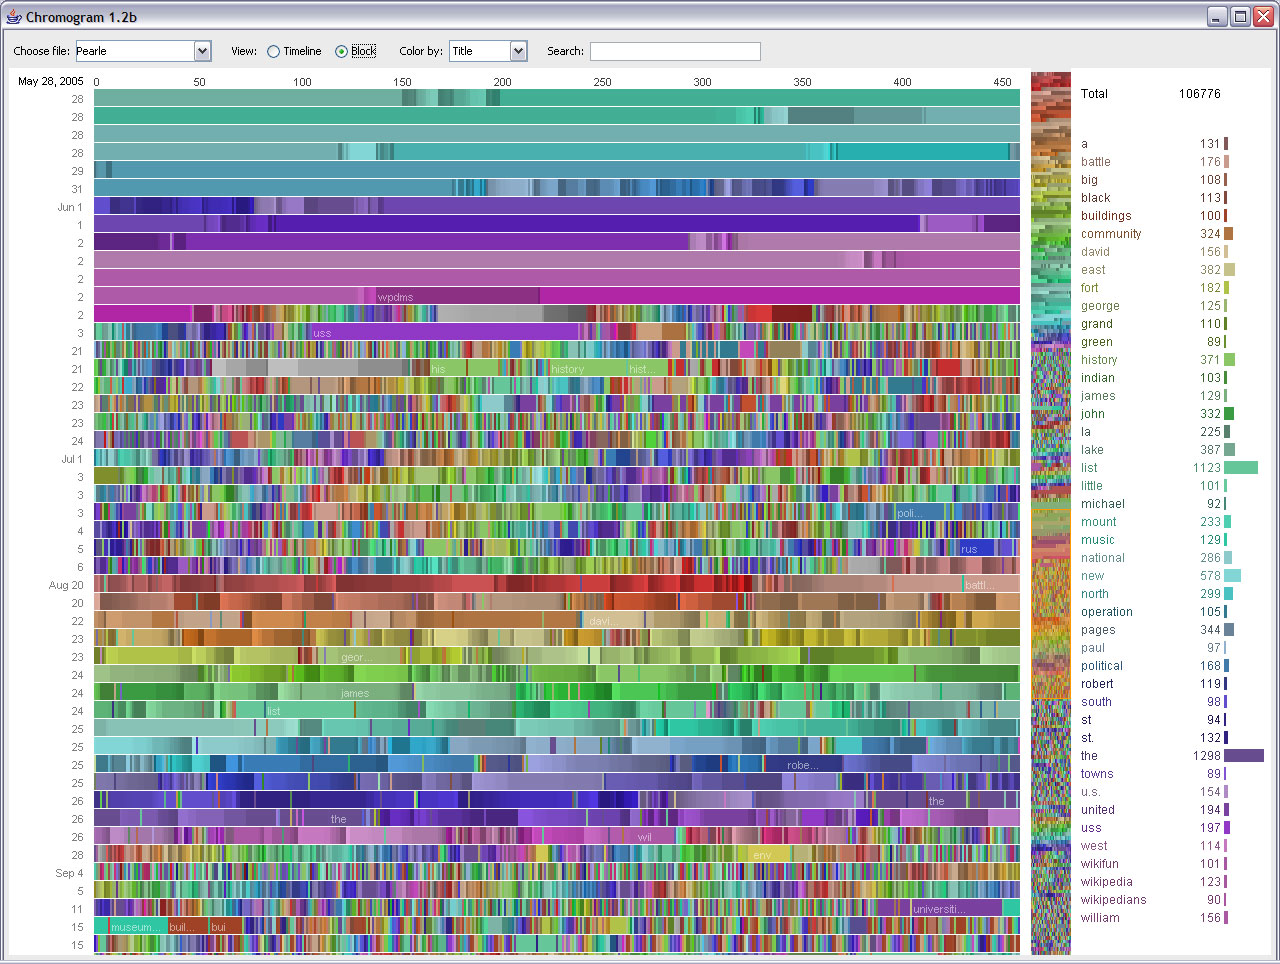 Chromogram from bot user, Pearle, showing rainbow patterns of alphabetical tasks